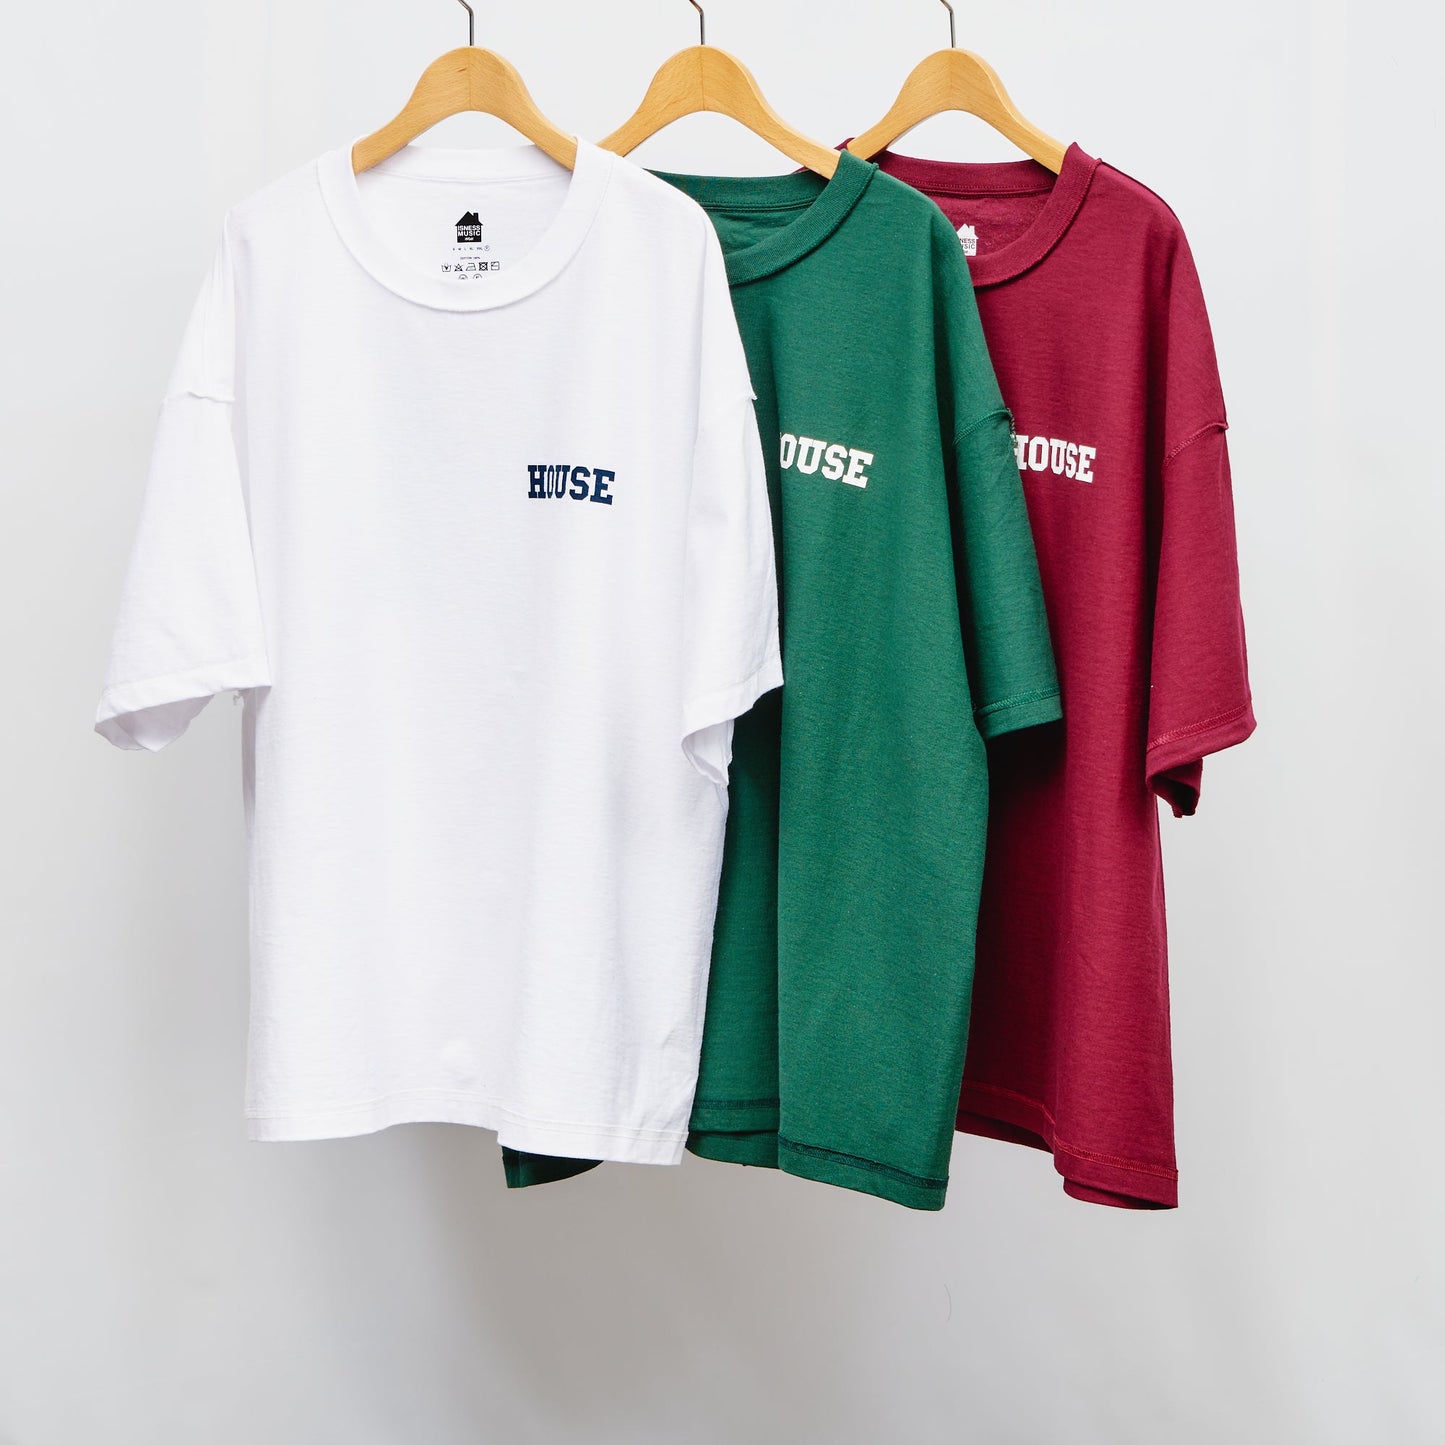 HOUSE S/S T-SHIRTS is-ness online shop 1